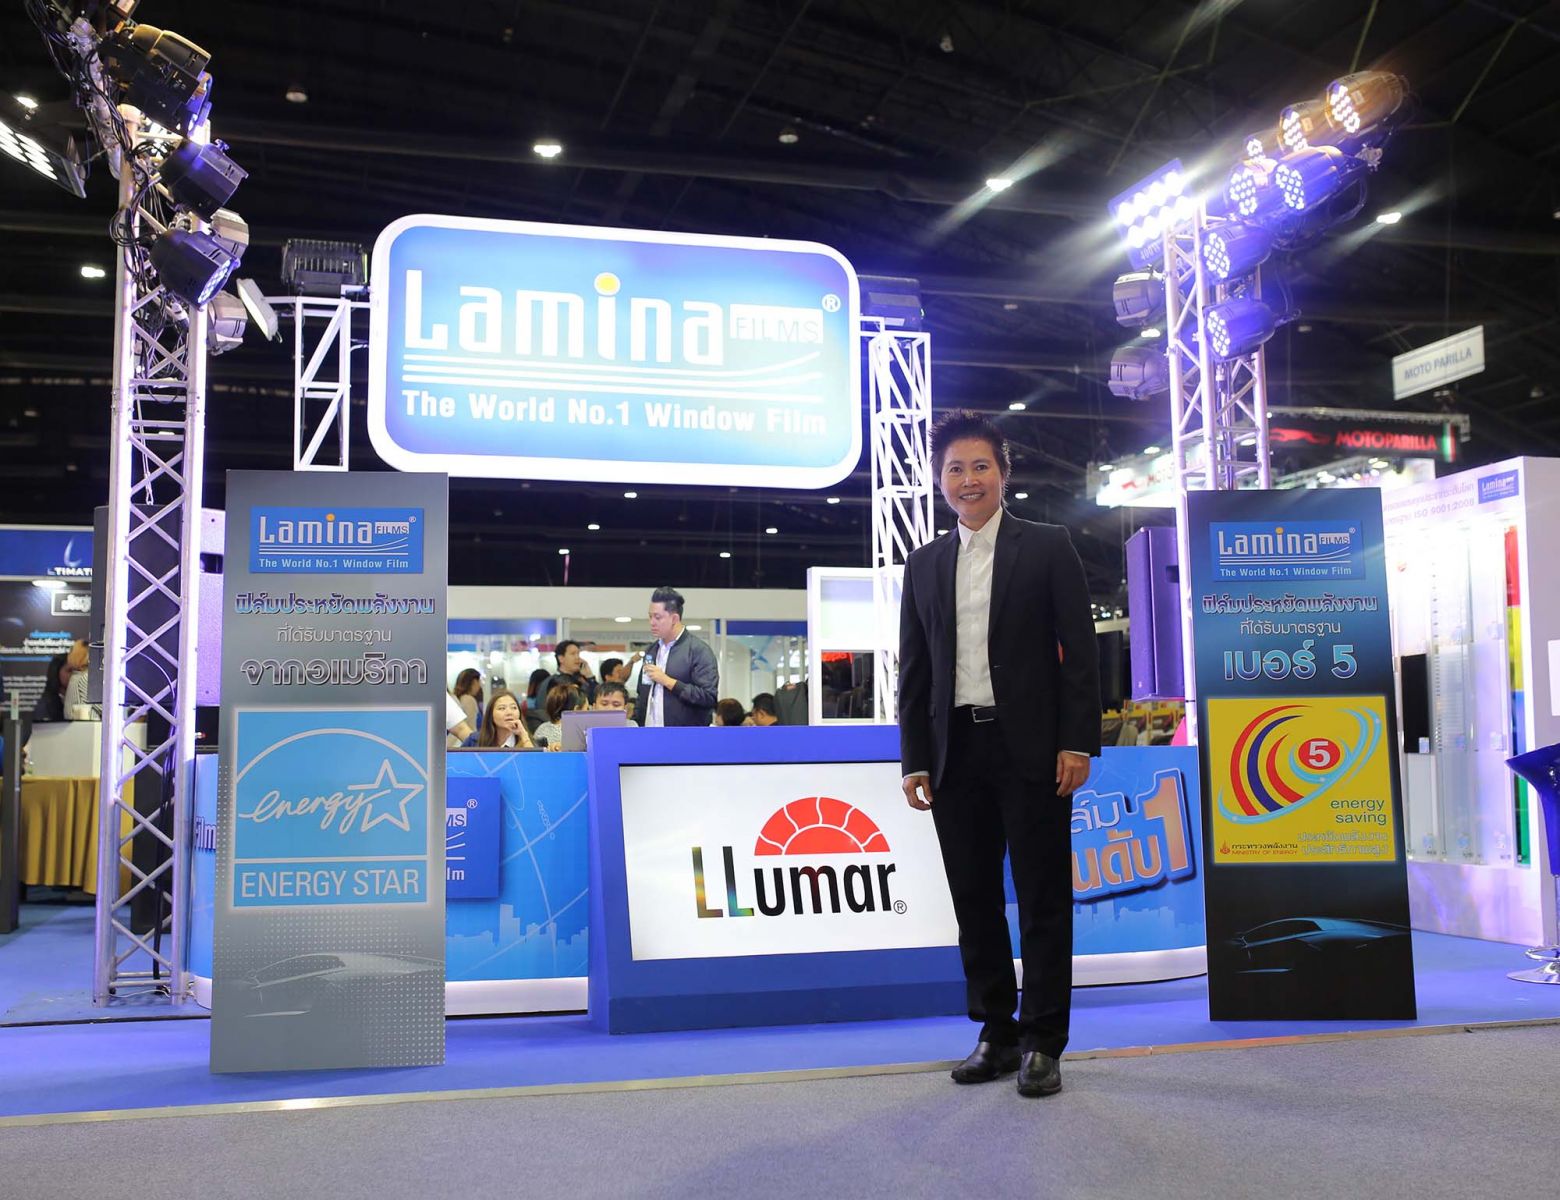 Lamina film has been certified for energy saving film no. 5